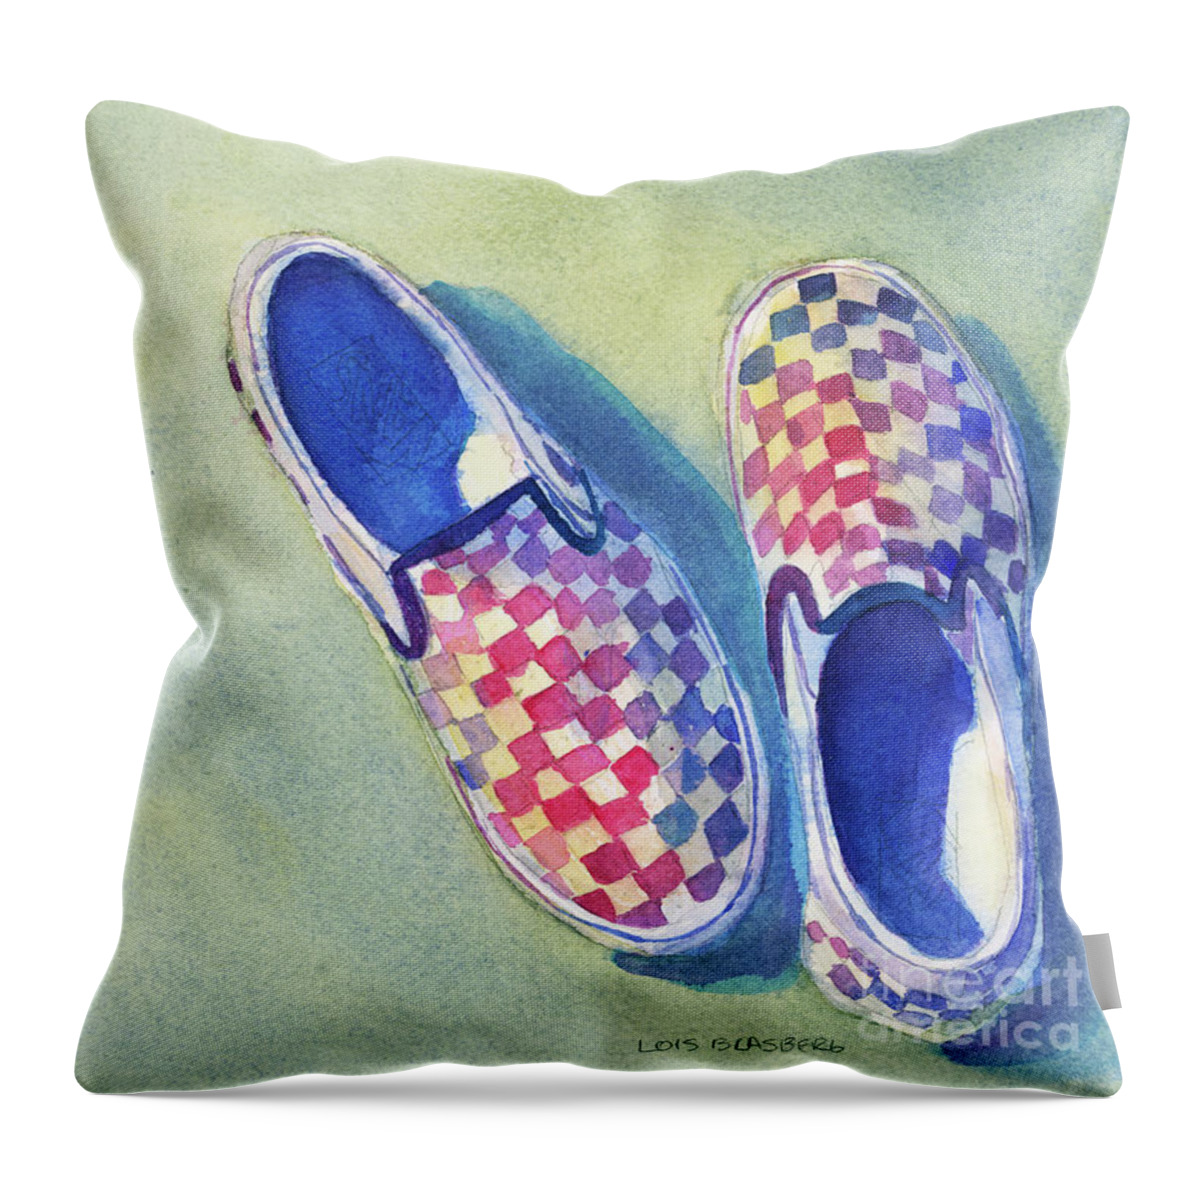 Shoes Throw Pillow featuring the painting Dani's Shoes by Lois Blasberg